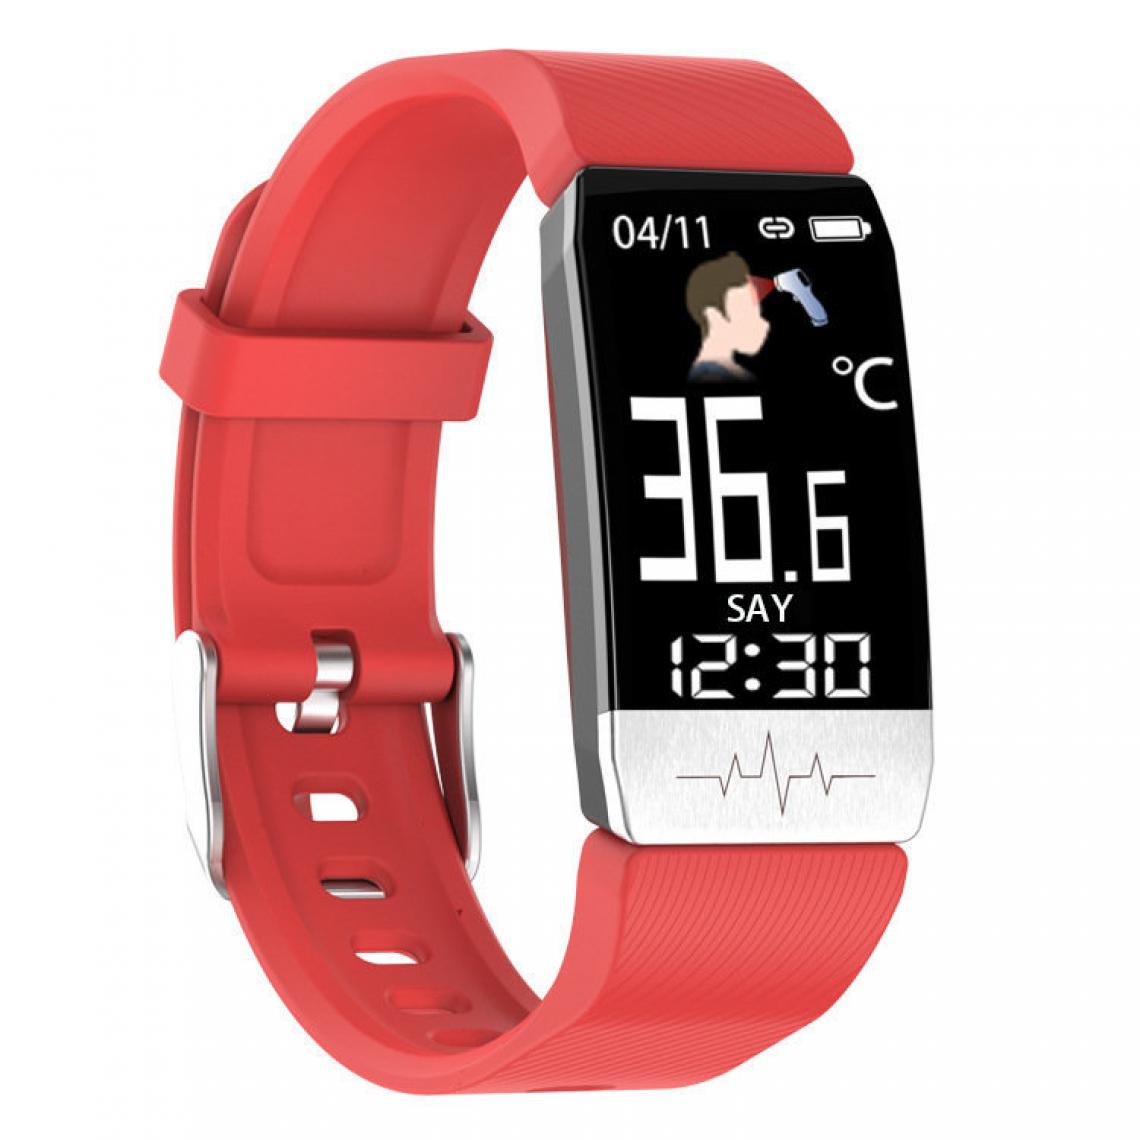 Chronotech Montres - Fitness Bracelet with Heart Rate Monitor Waterproof IP68 Fitness Tracker Smartwatch ECG PPG Activity Tracker Heart Rate Monitor Pedometer Watch Sports Watch(Red) - Montre connectée